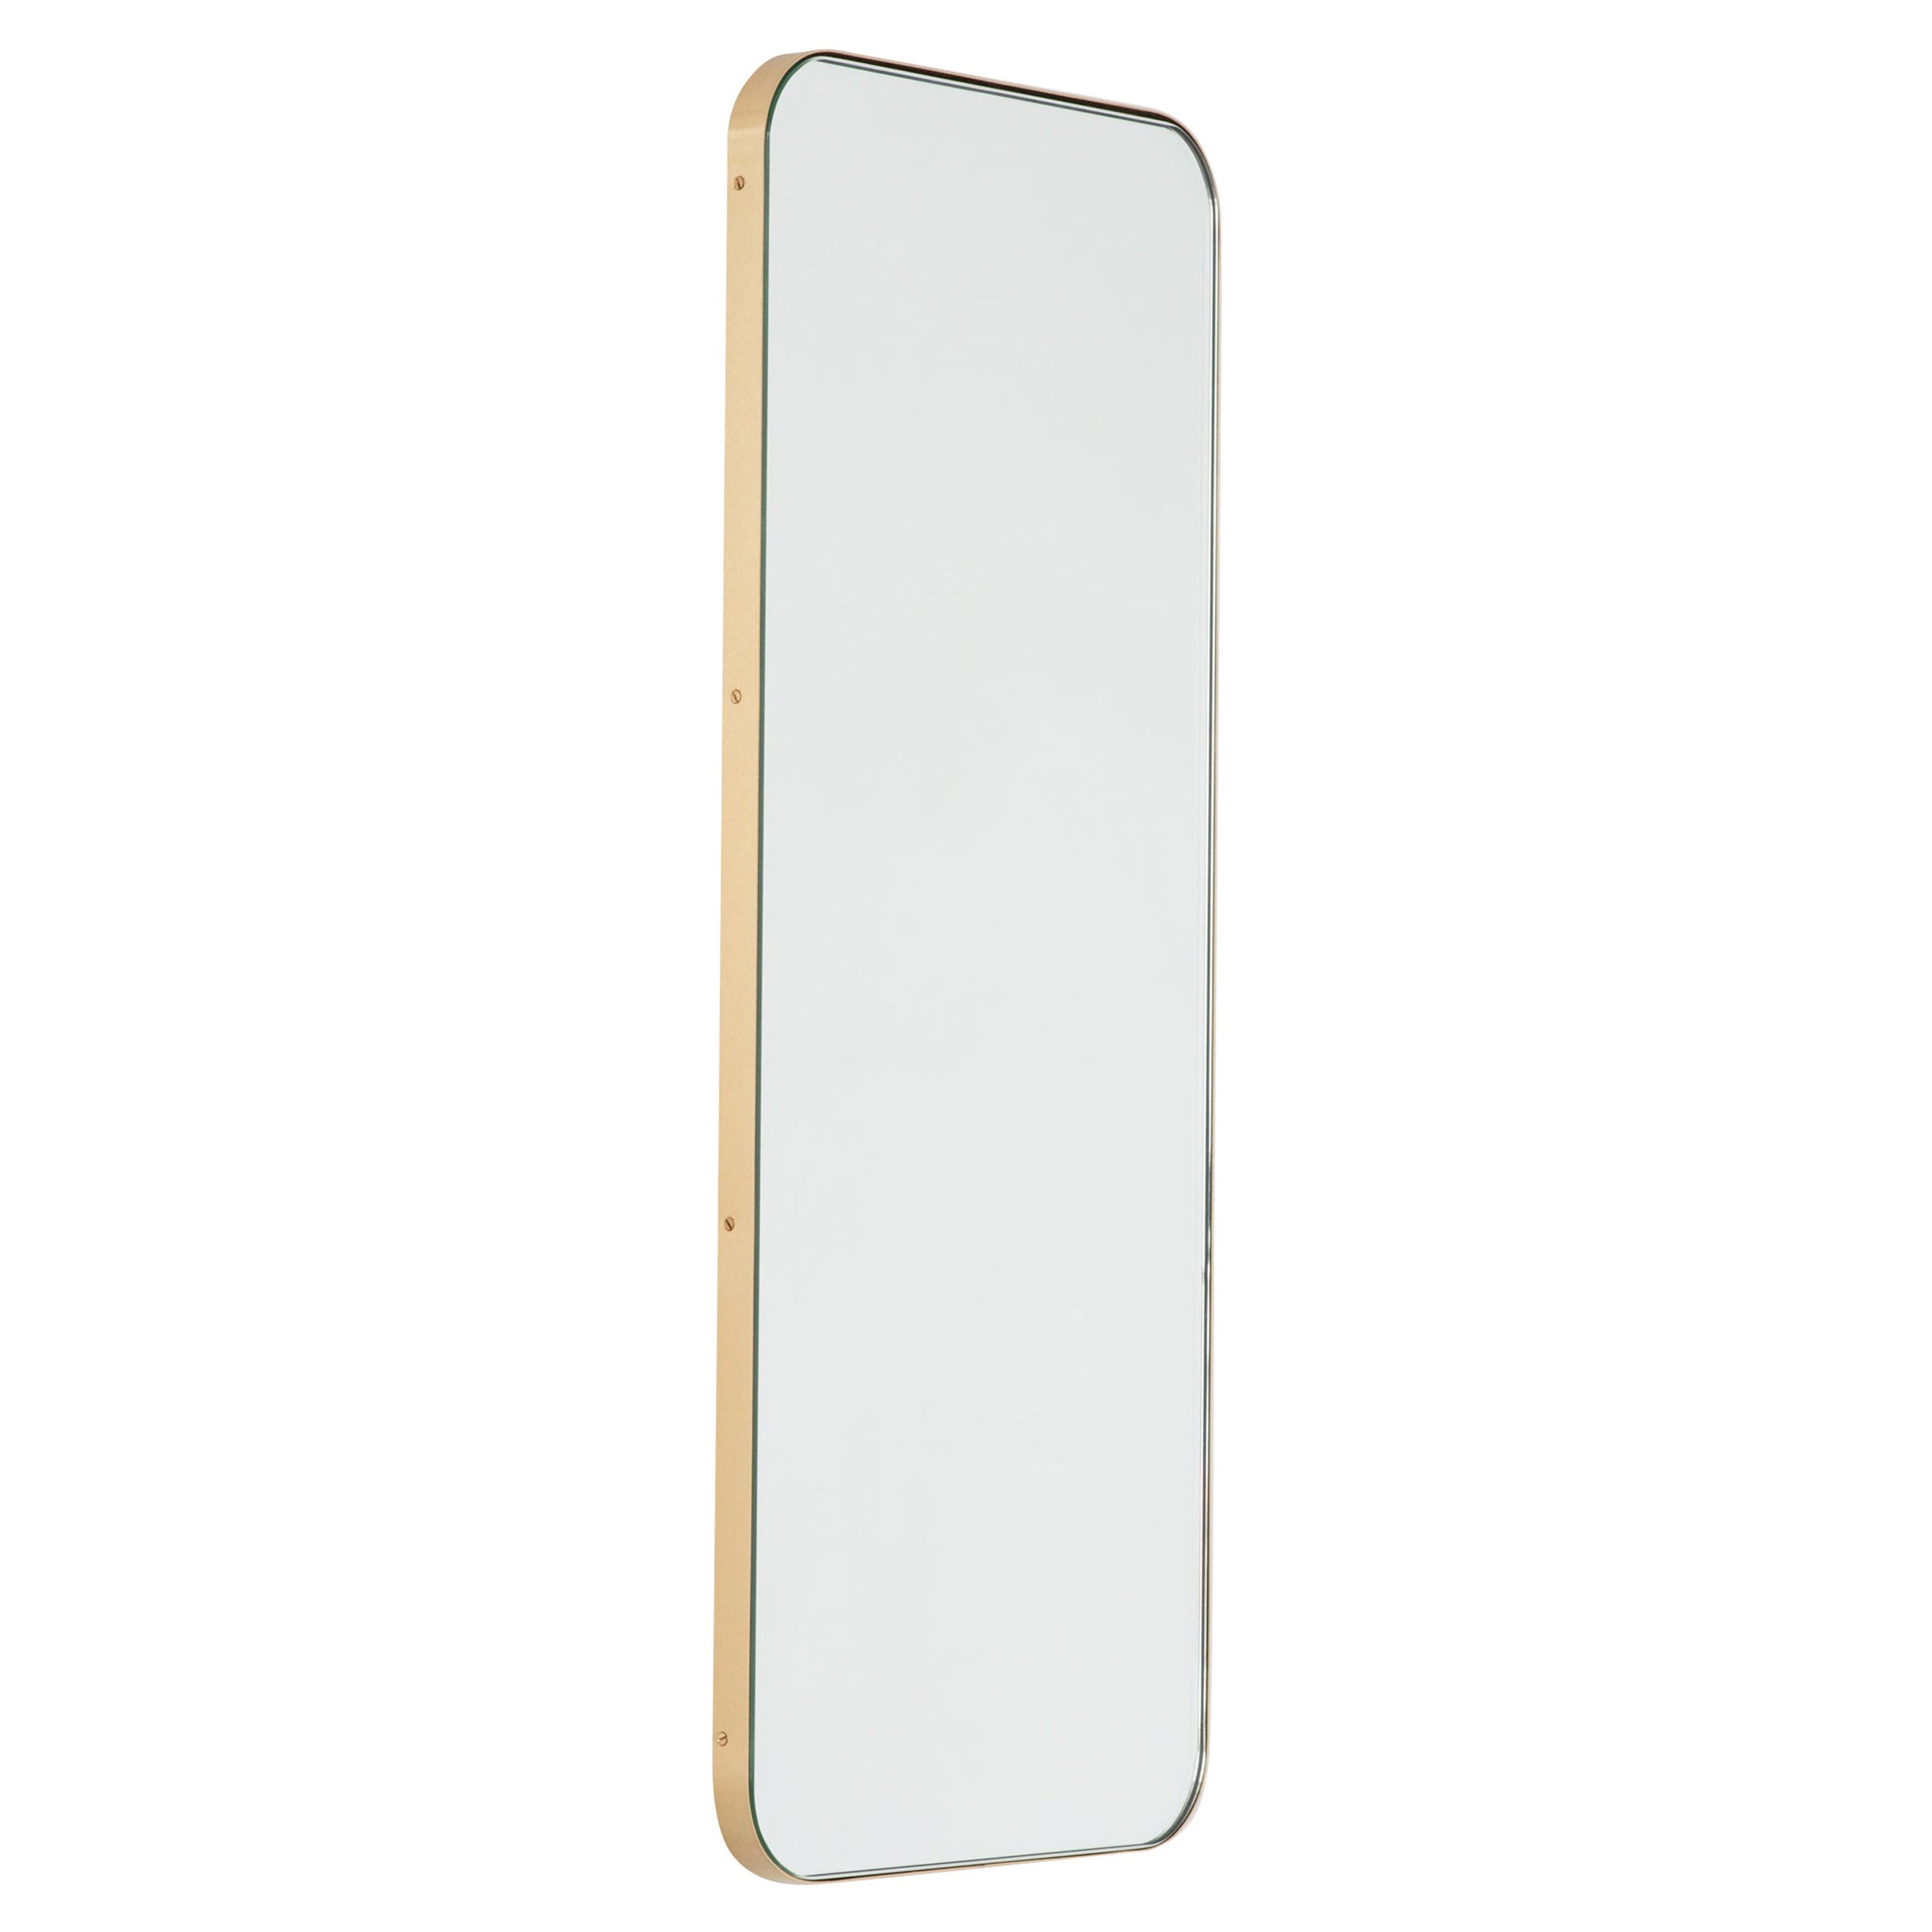 Quadris Rectangular Minimalist Mirror with a Brass Frame, Small For Sale